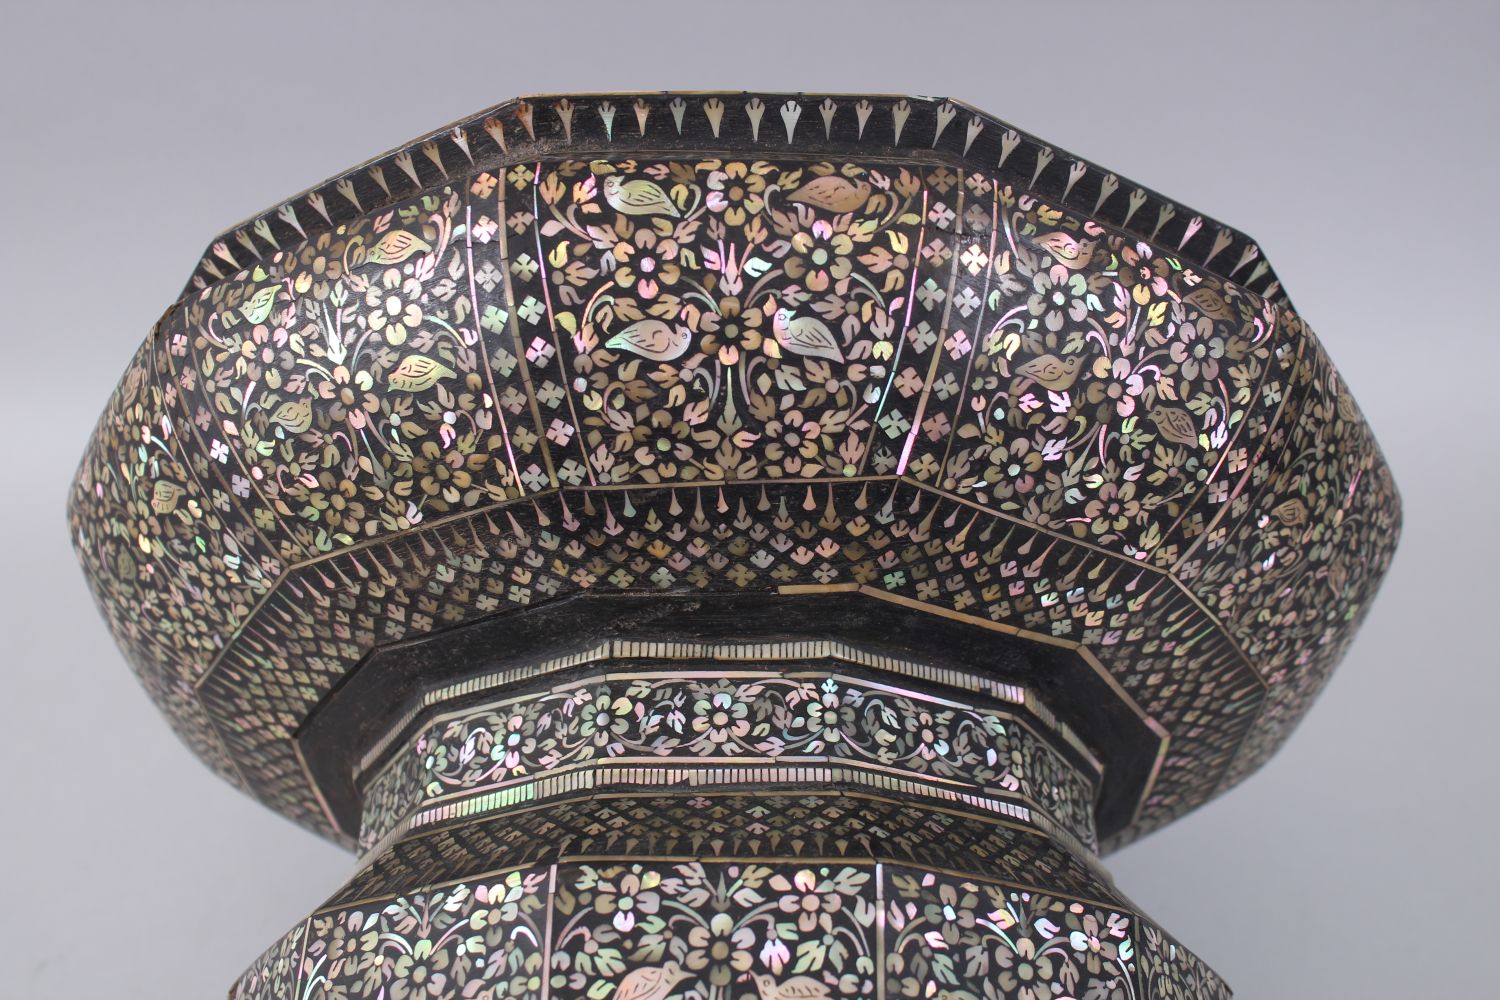 A LARGE 19TH CENTURY THAI MOTHER OF PEARL INLAID LACQUERED TWELVE SIDED PEDESTAL BOWL, 36cm diameter - Image 4 of 7